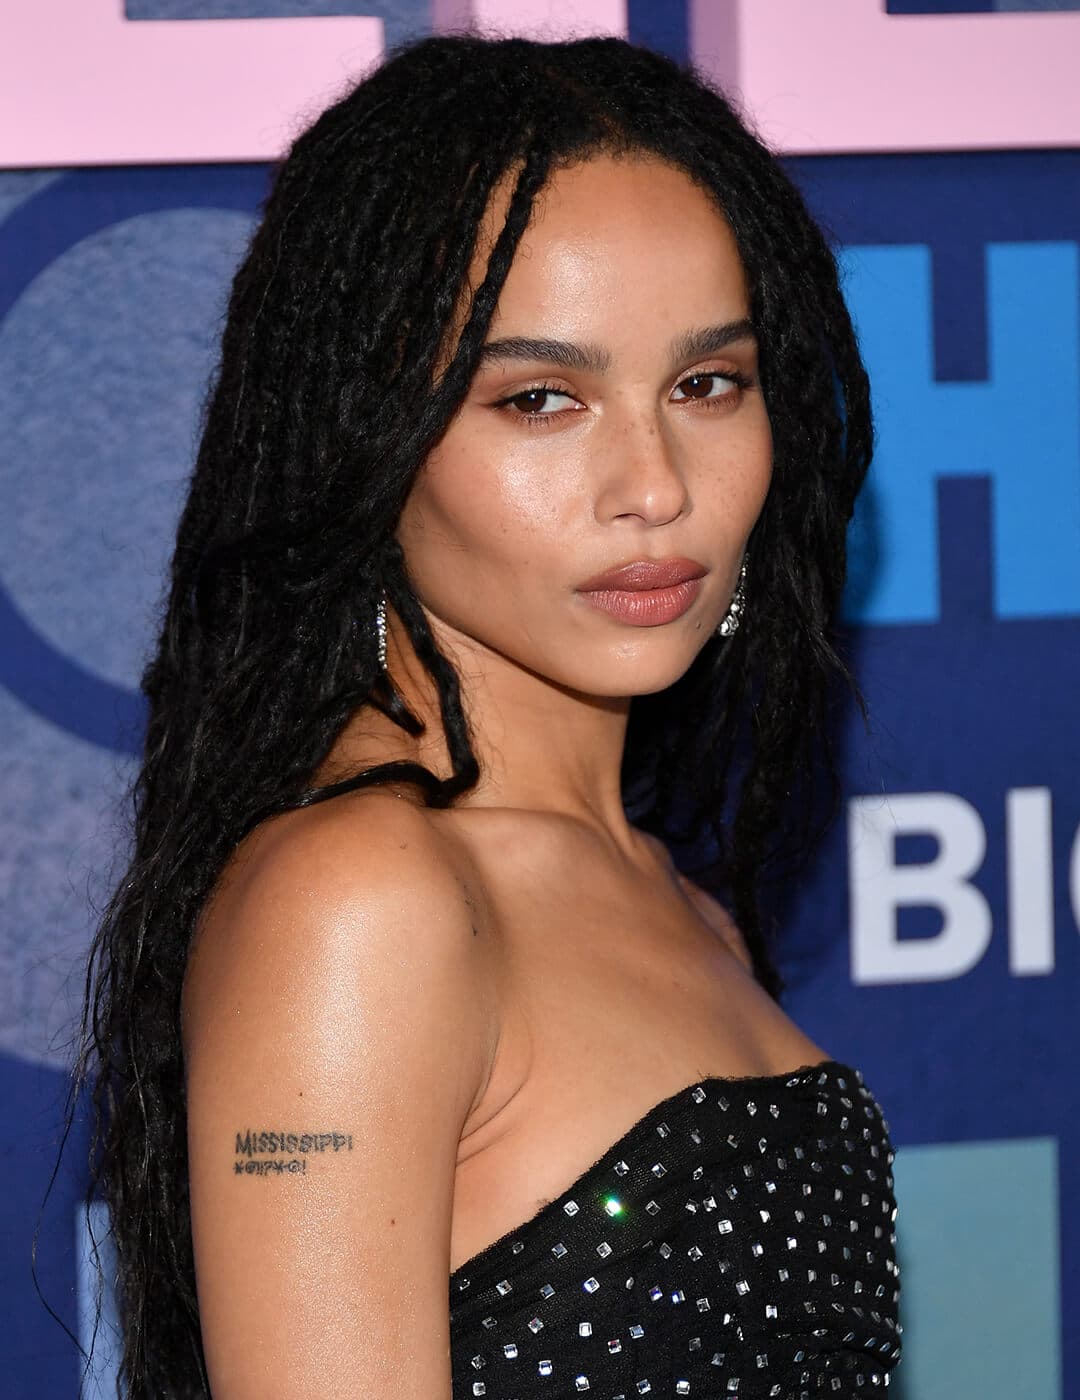 Zoë Kravitz rocking a loose braided hairstyle and black sequined dress on the red carpet